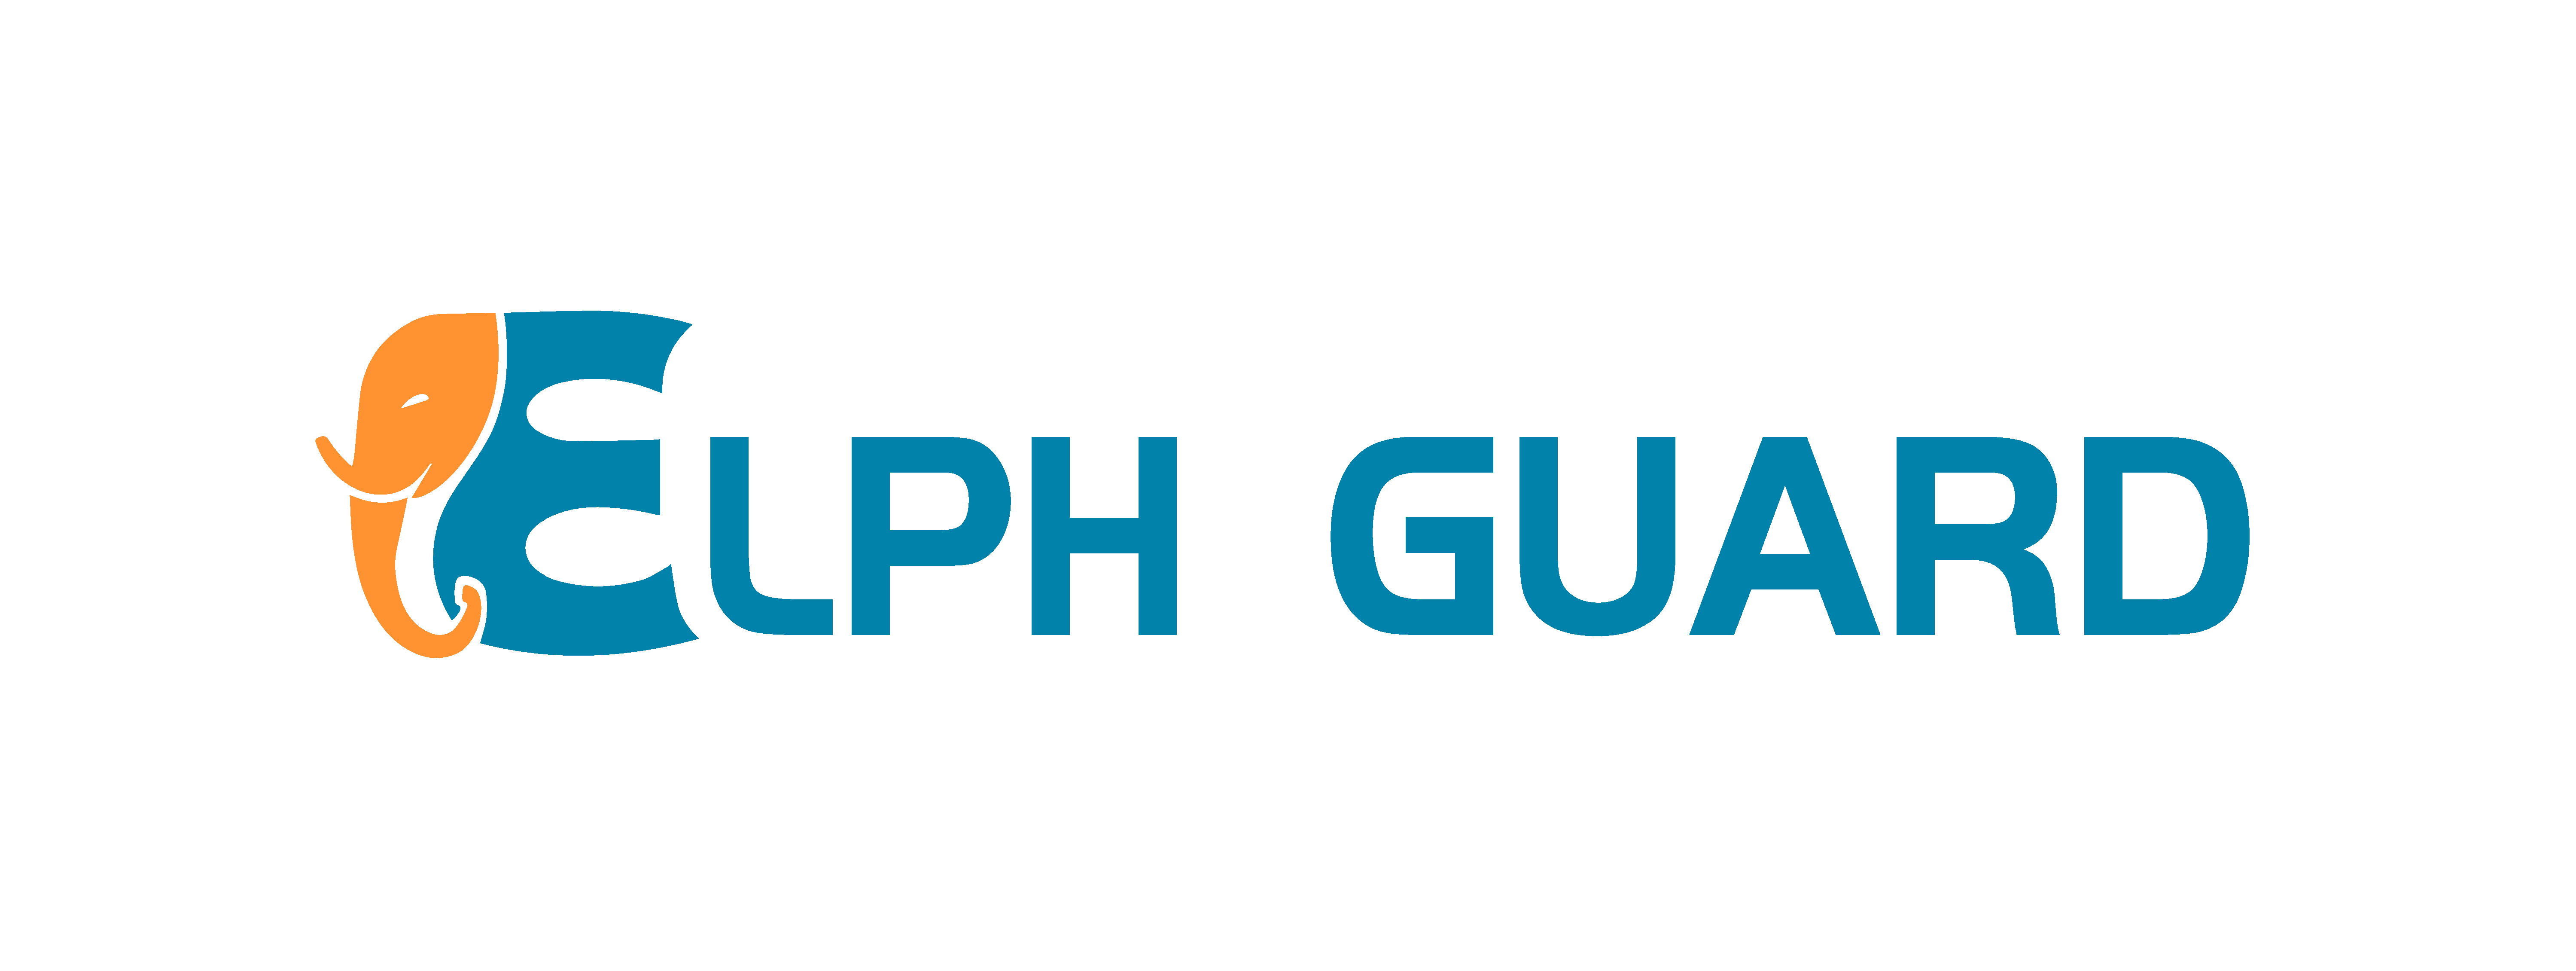 ELPH GUARD is dedicated to enhancing the quality of life for the elderly in their later years, steadfastly researching and manufacturing medical rehabilitation devices for seniors such as walkers, shower chairs, commode chairs, wedge pillows